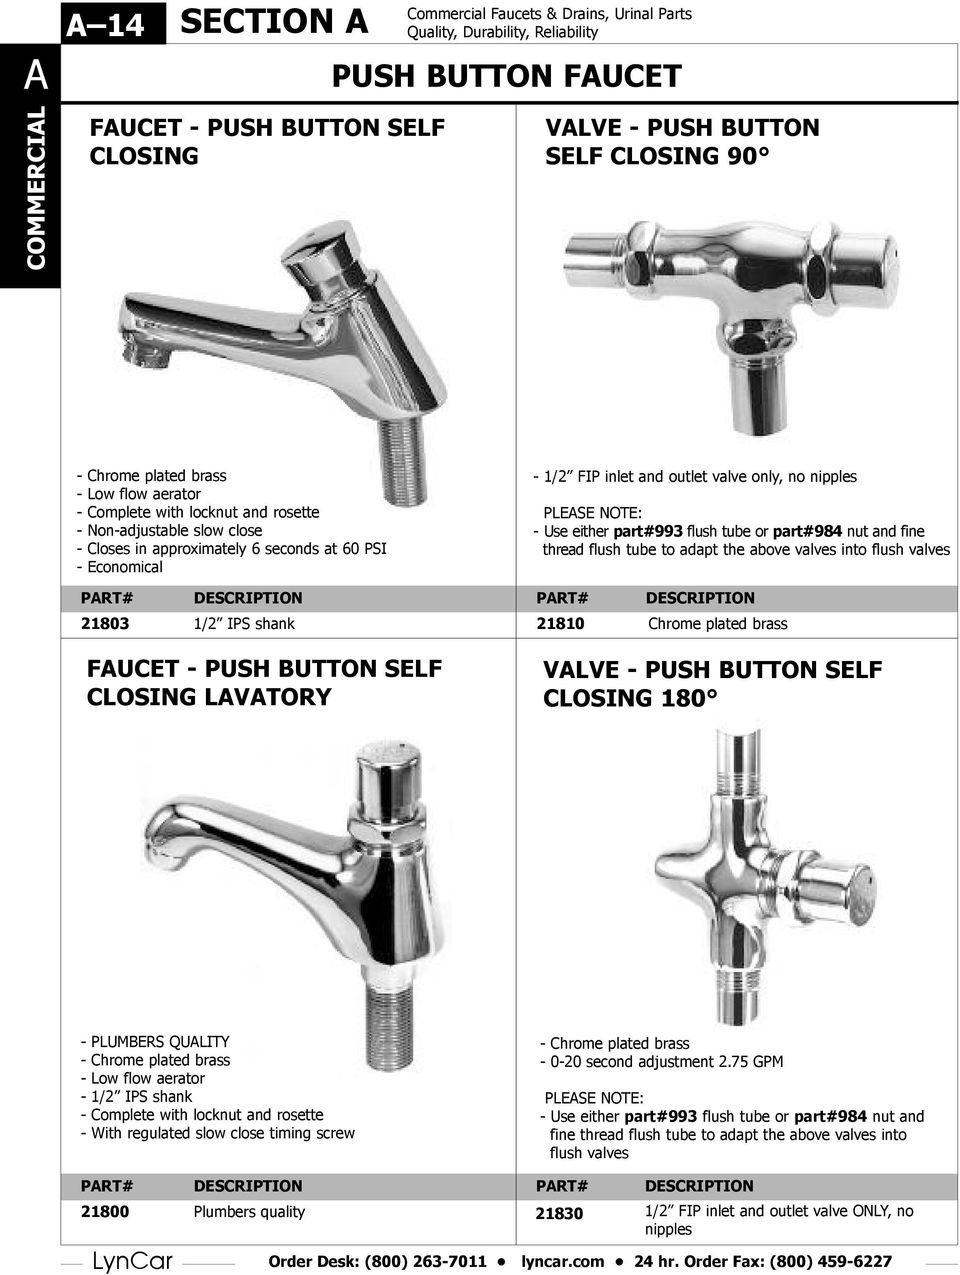 inlet and outlet valve only, no nipples PLEASE NOTE: - Use either part#993 flush tube or part#984 nut and fine thread flush tube to adapt the above valves into flush valves 21810 Chrome plated brass